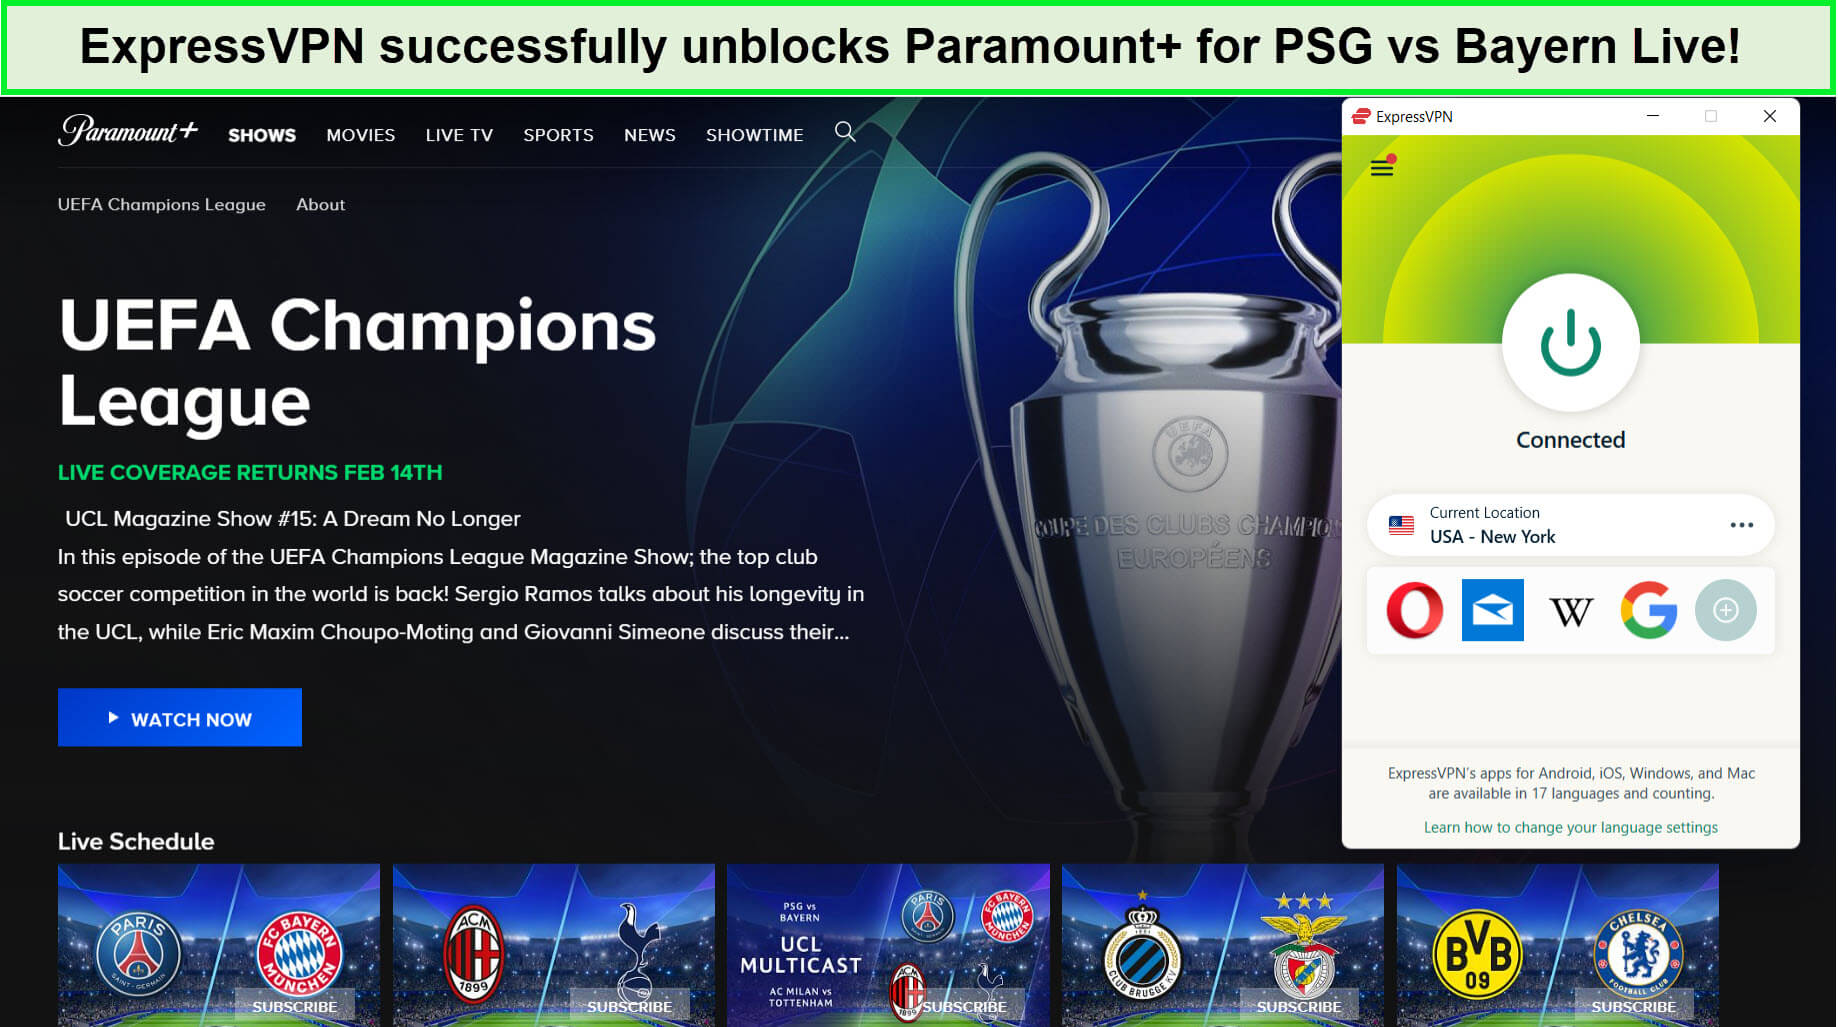 paramount-plus-unblocked-with-expressvpn-for-psg-vs-bayern-live-in-canada